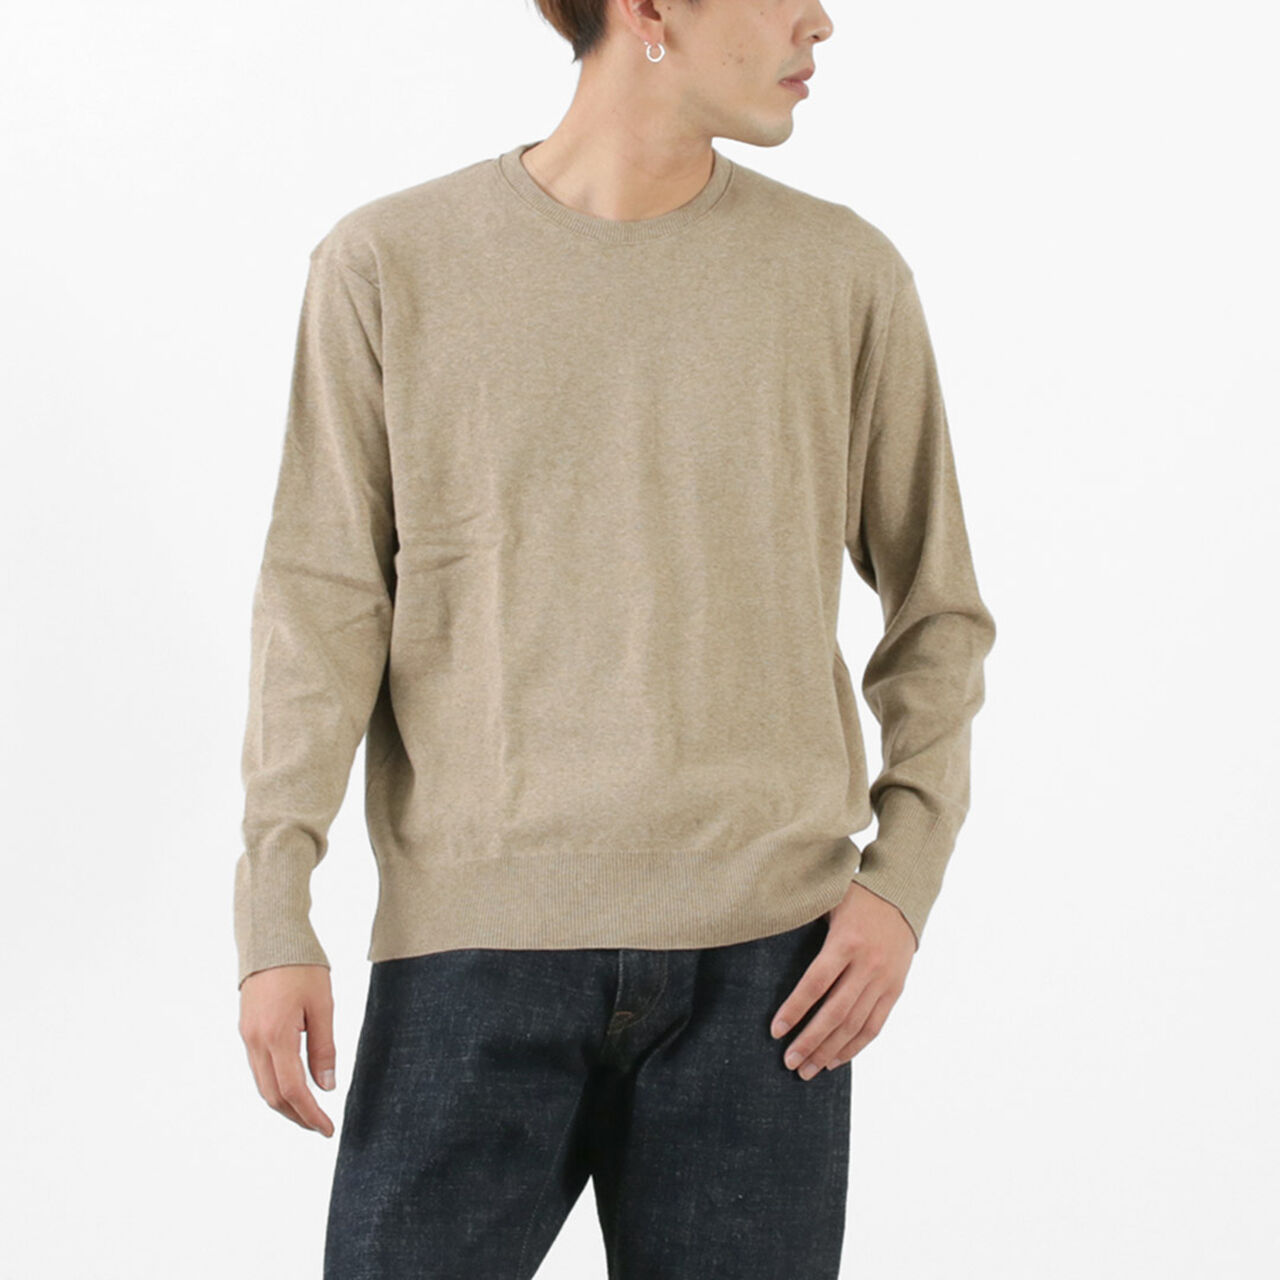 Lupo Crew Neck Relaxed Fit Knit Sewn,MarroneMelange, large image number 0